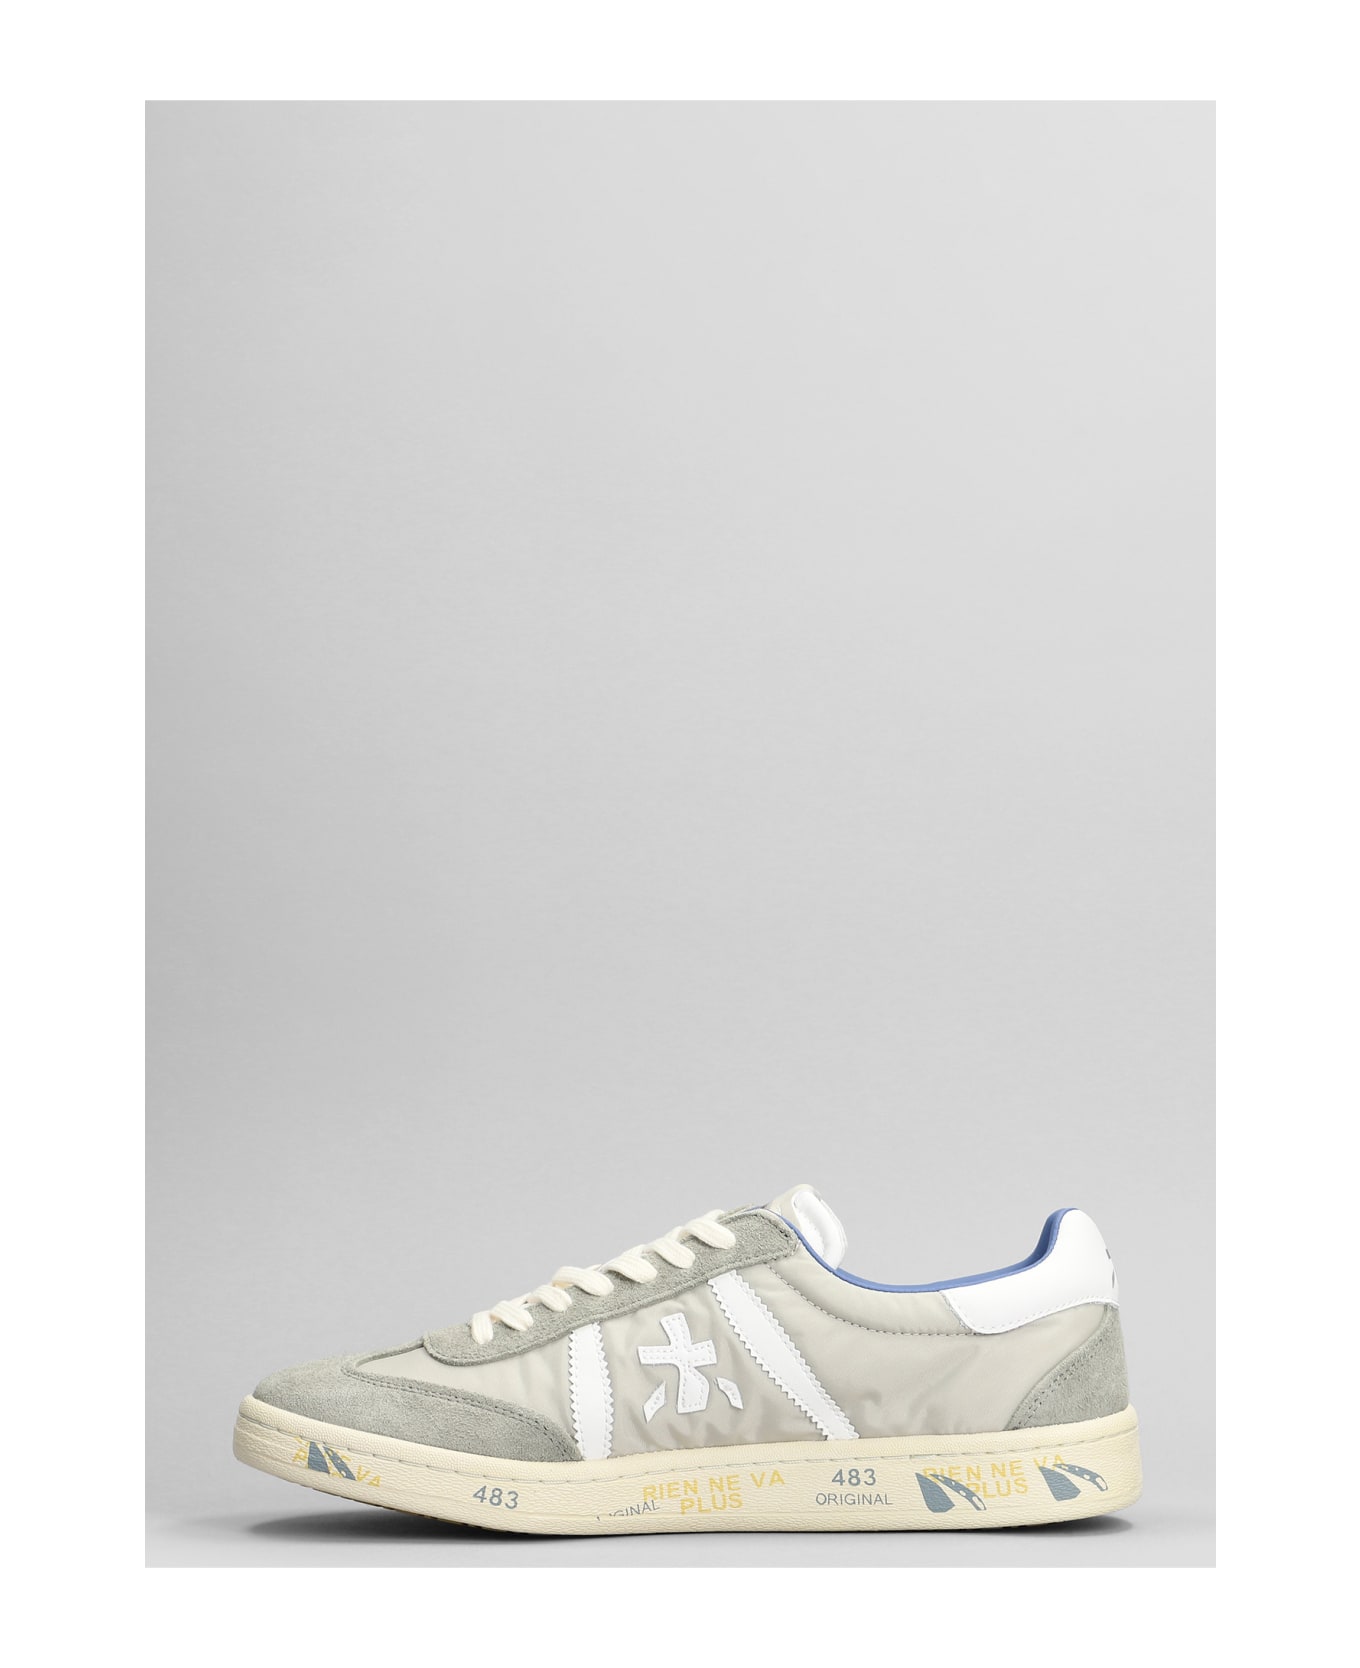 Premiata Bonnie Sneakers In Grey Suede And Fabric - grey スニーカー